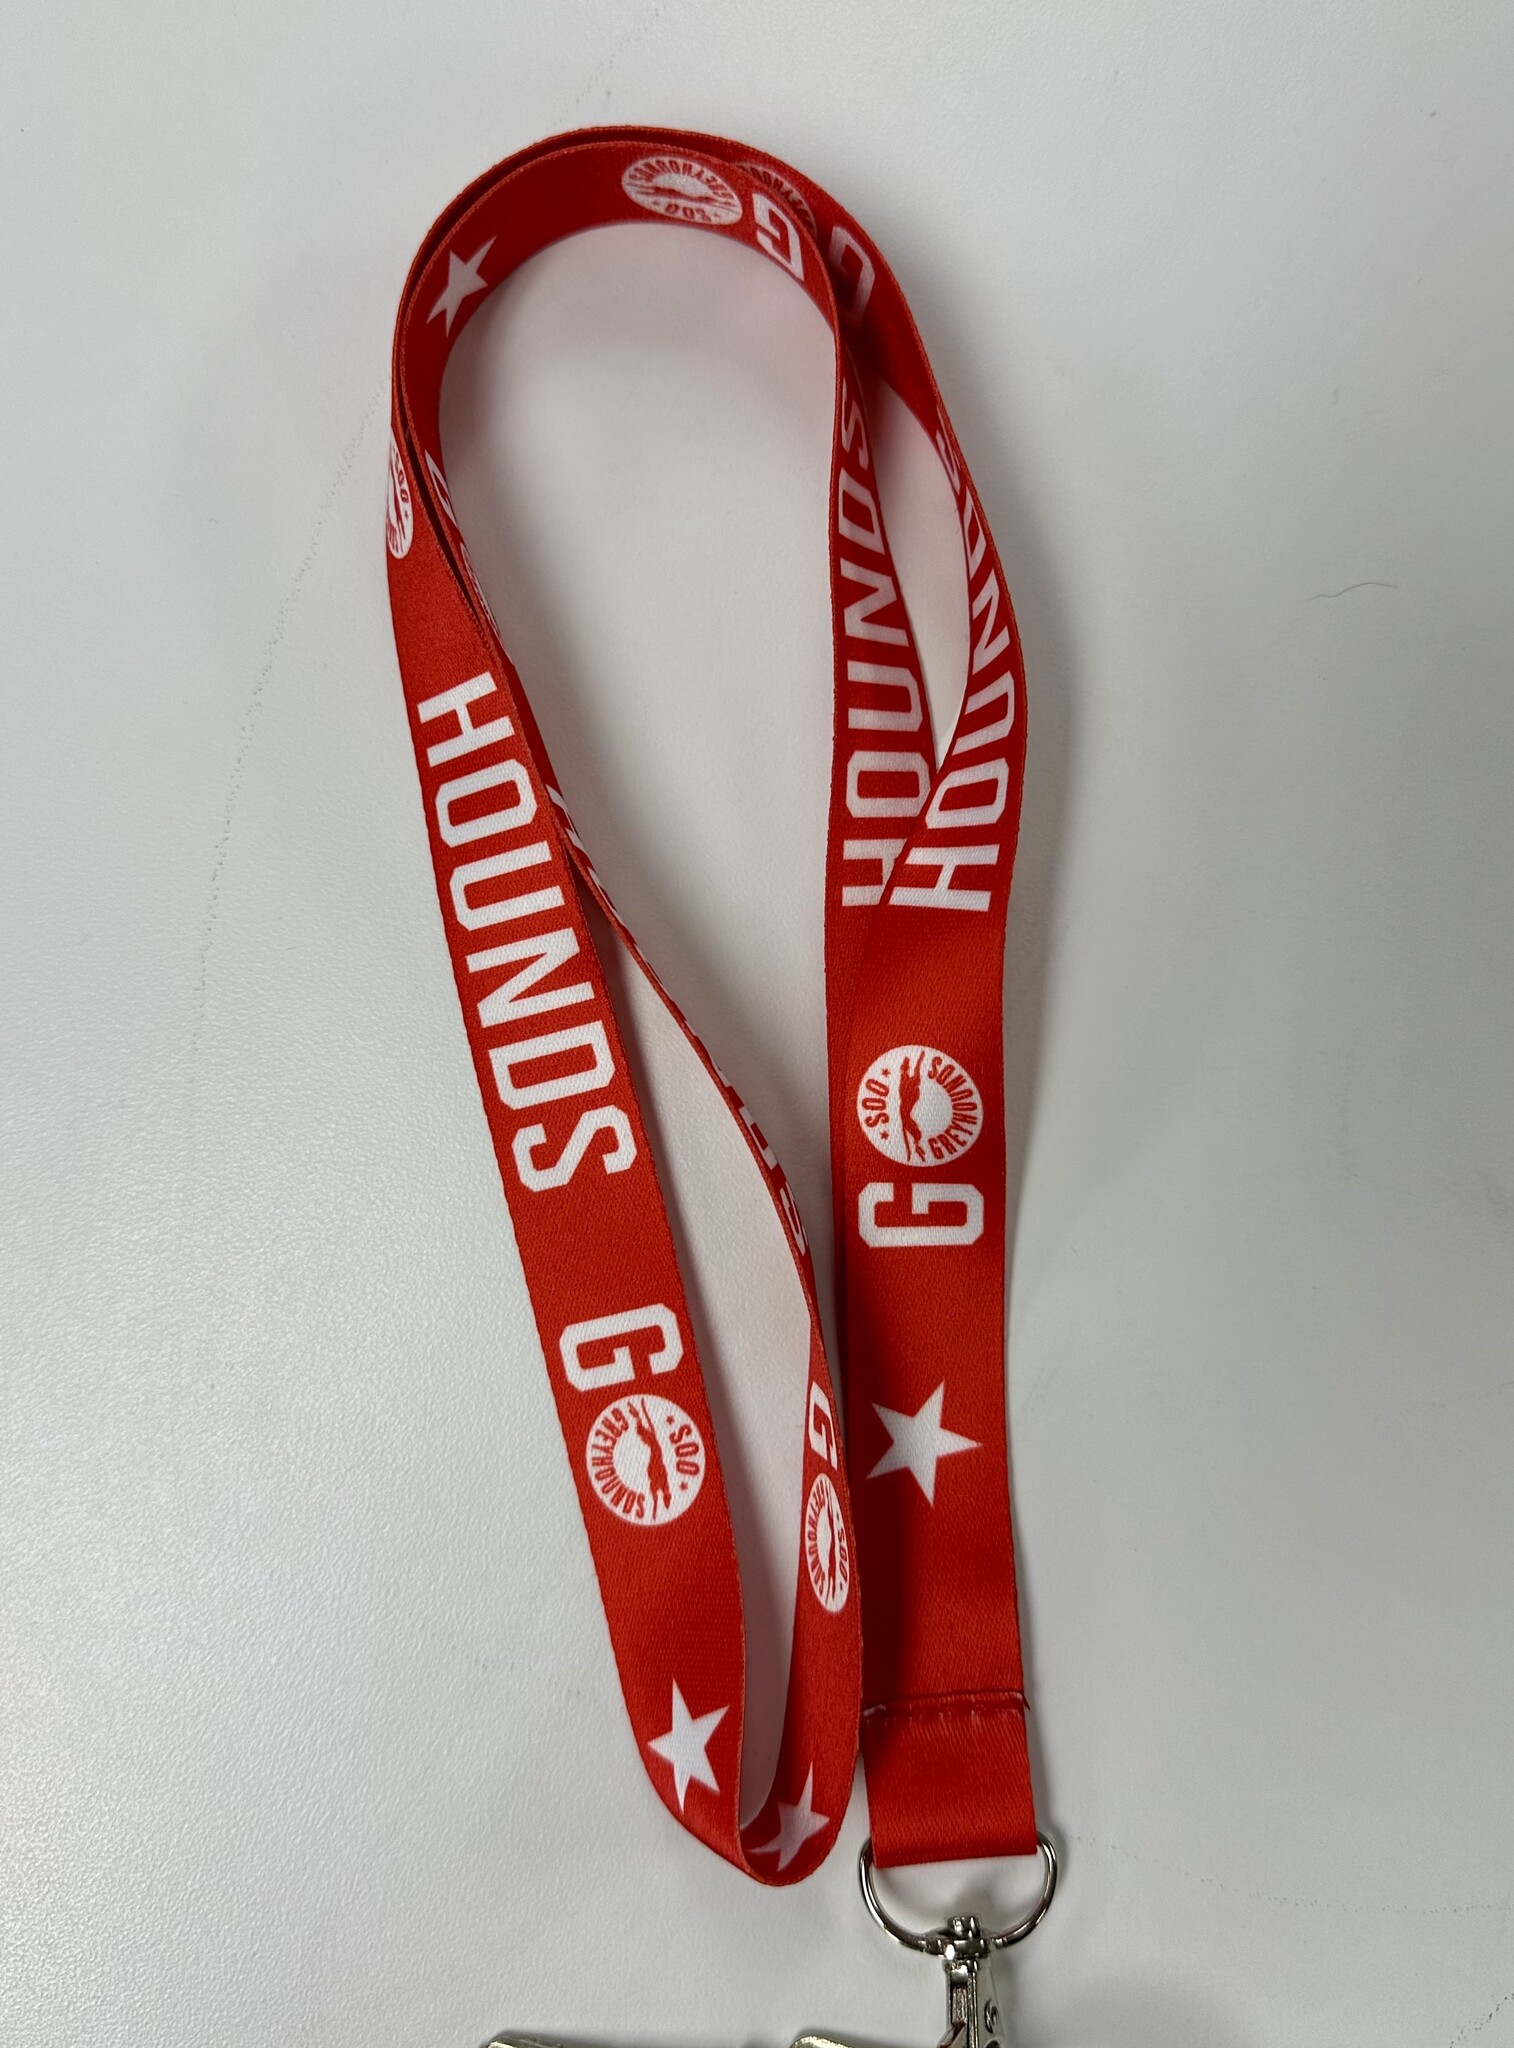 Red Go Hounds Go Lanyard